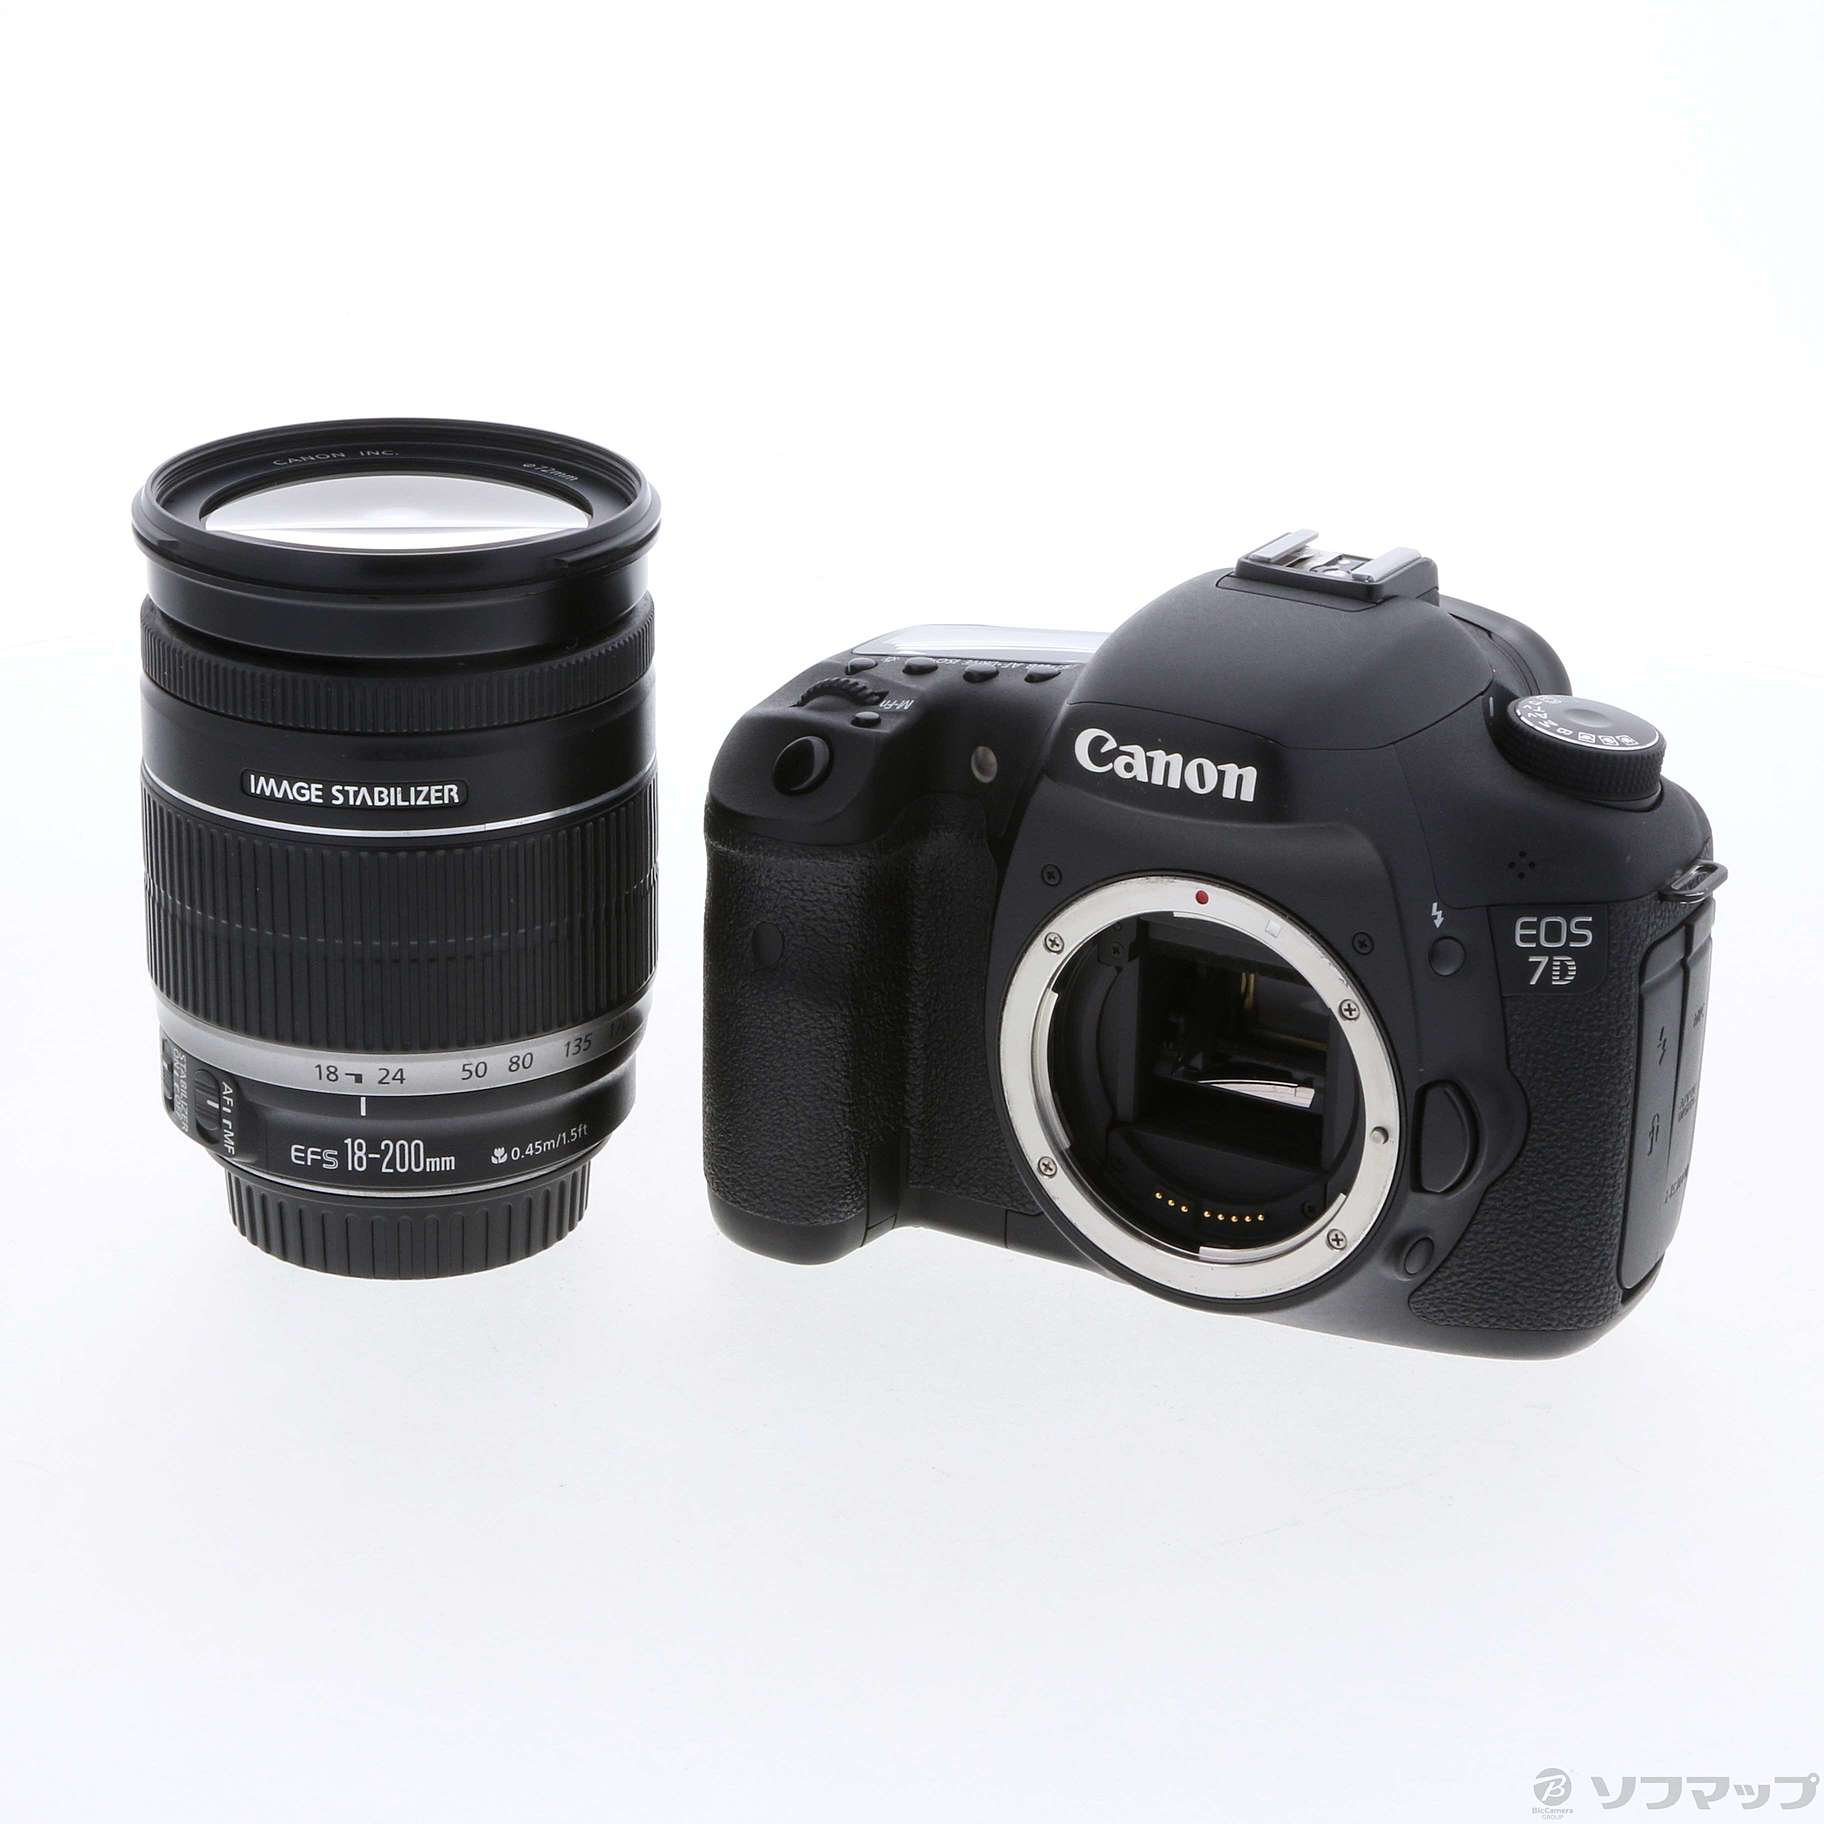 EOS 7D EF-S 18-200 IS レンズキット (1800万画素／CF)